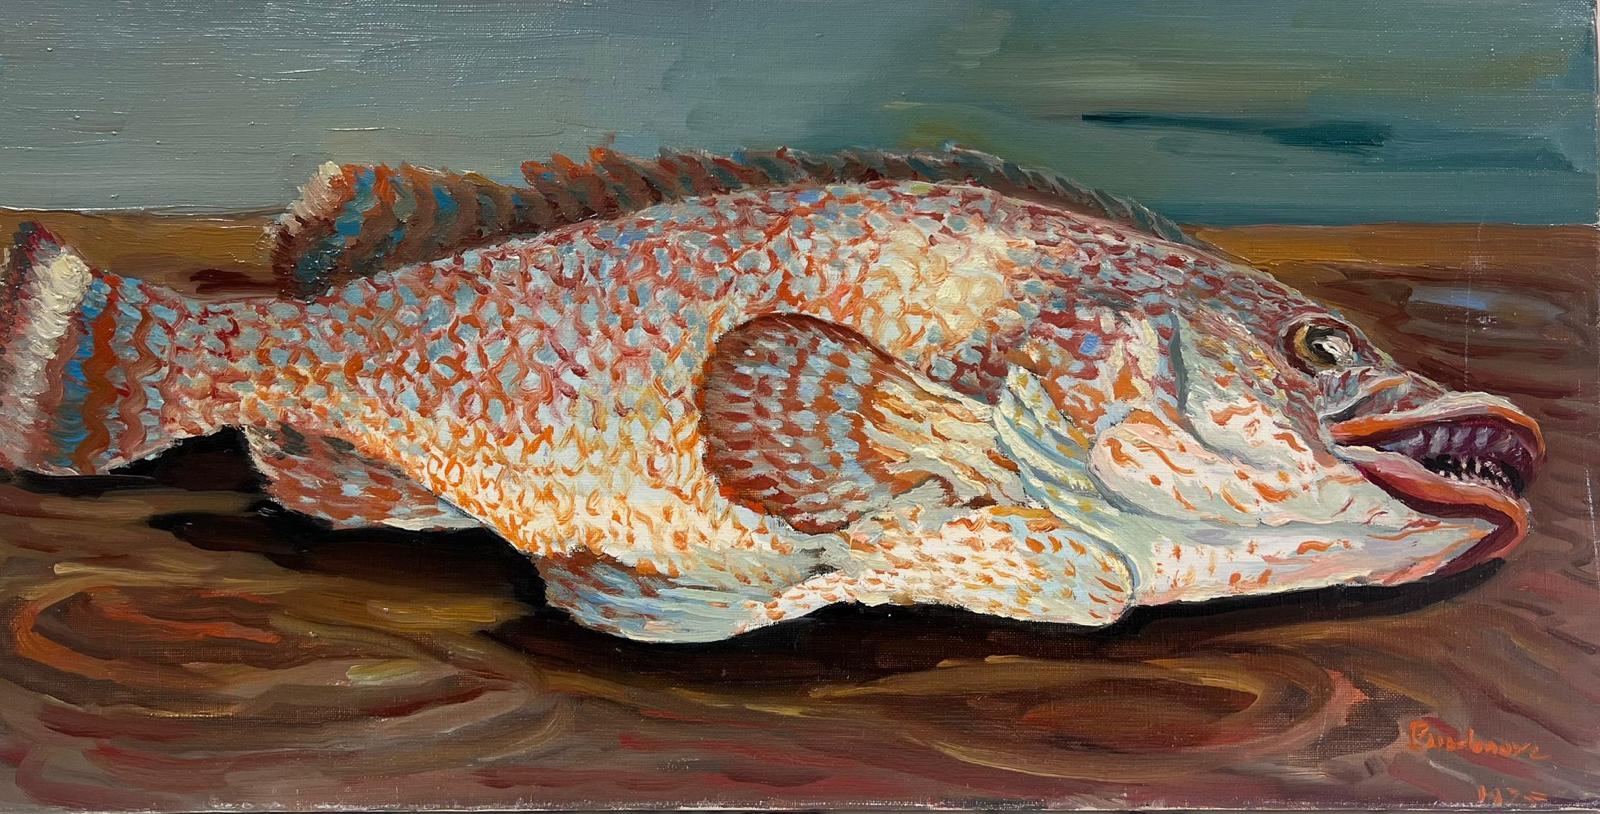 Still Life of an Exotic Fish
by Georges Bordonave (French contemporary)  
signed oil painting on canvas, unframed
dated 1973/5?
unframed: 12 x 24 inches
condition: very good
provenance: from a large private collection of this artists work, western